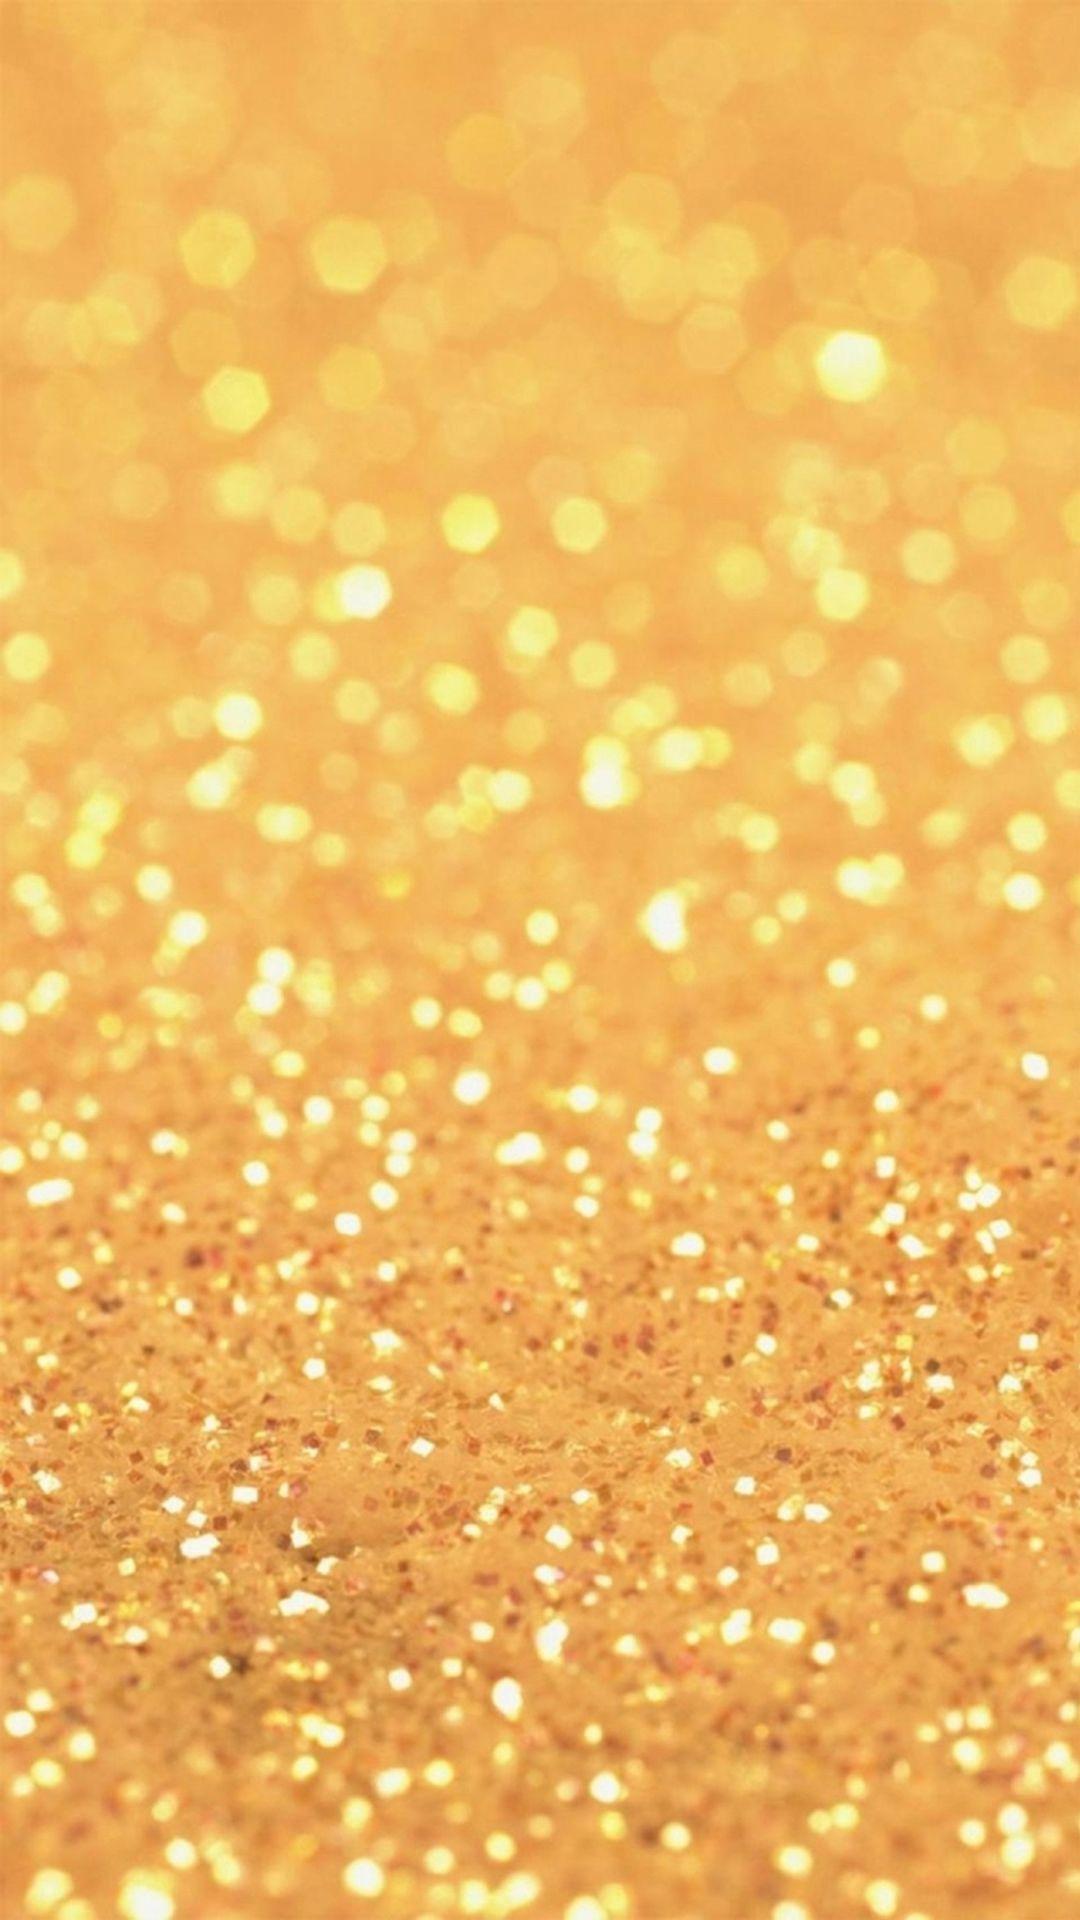 Abstract Golden Blink Shiny Color Background iPhone 6 wallpaper